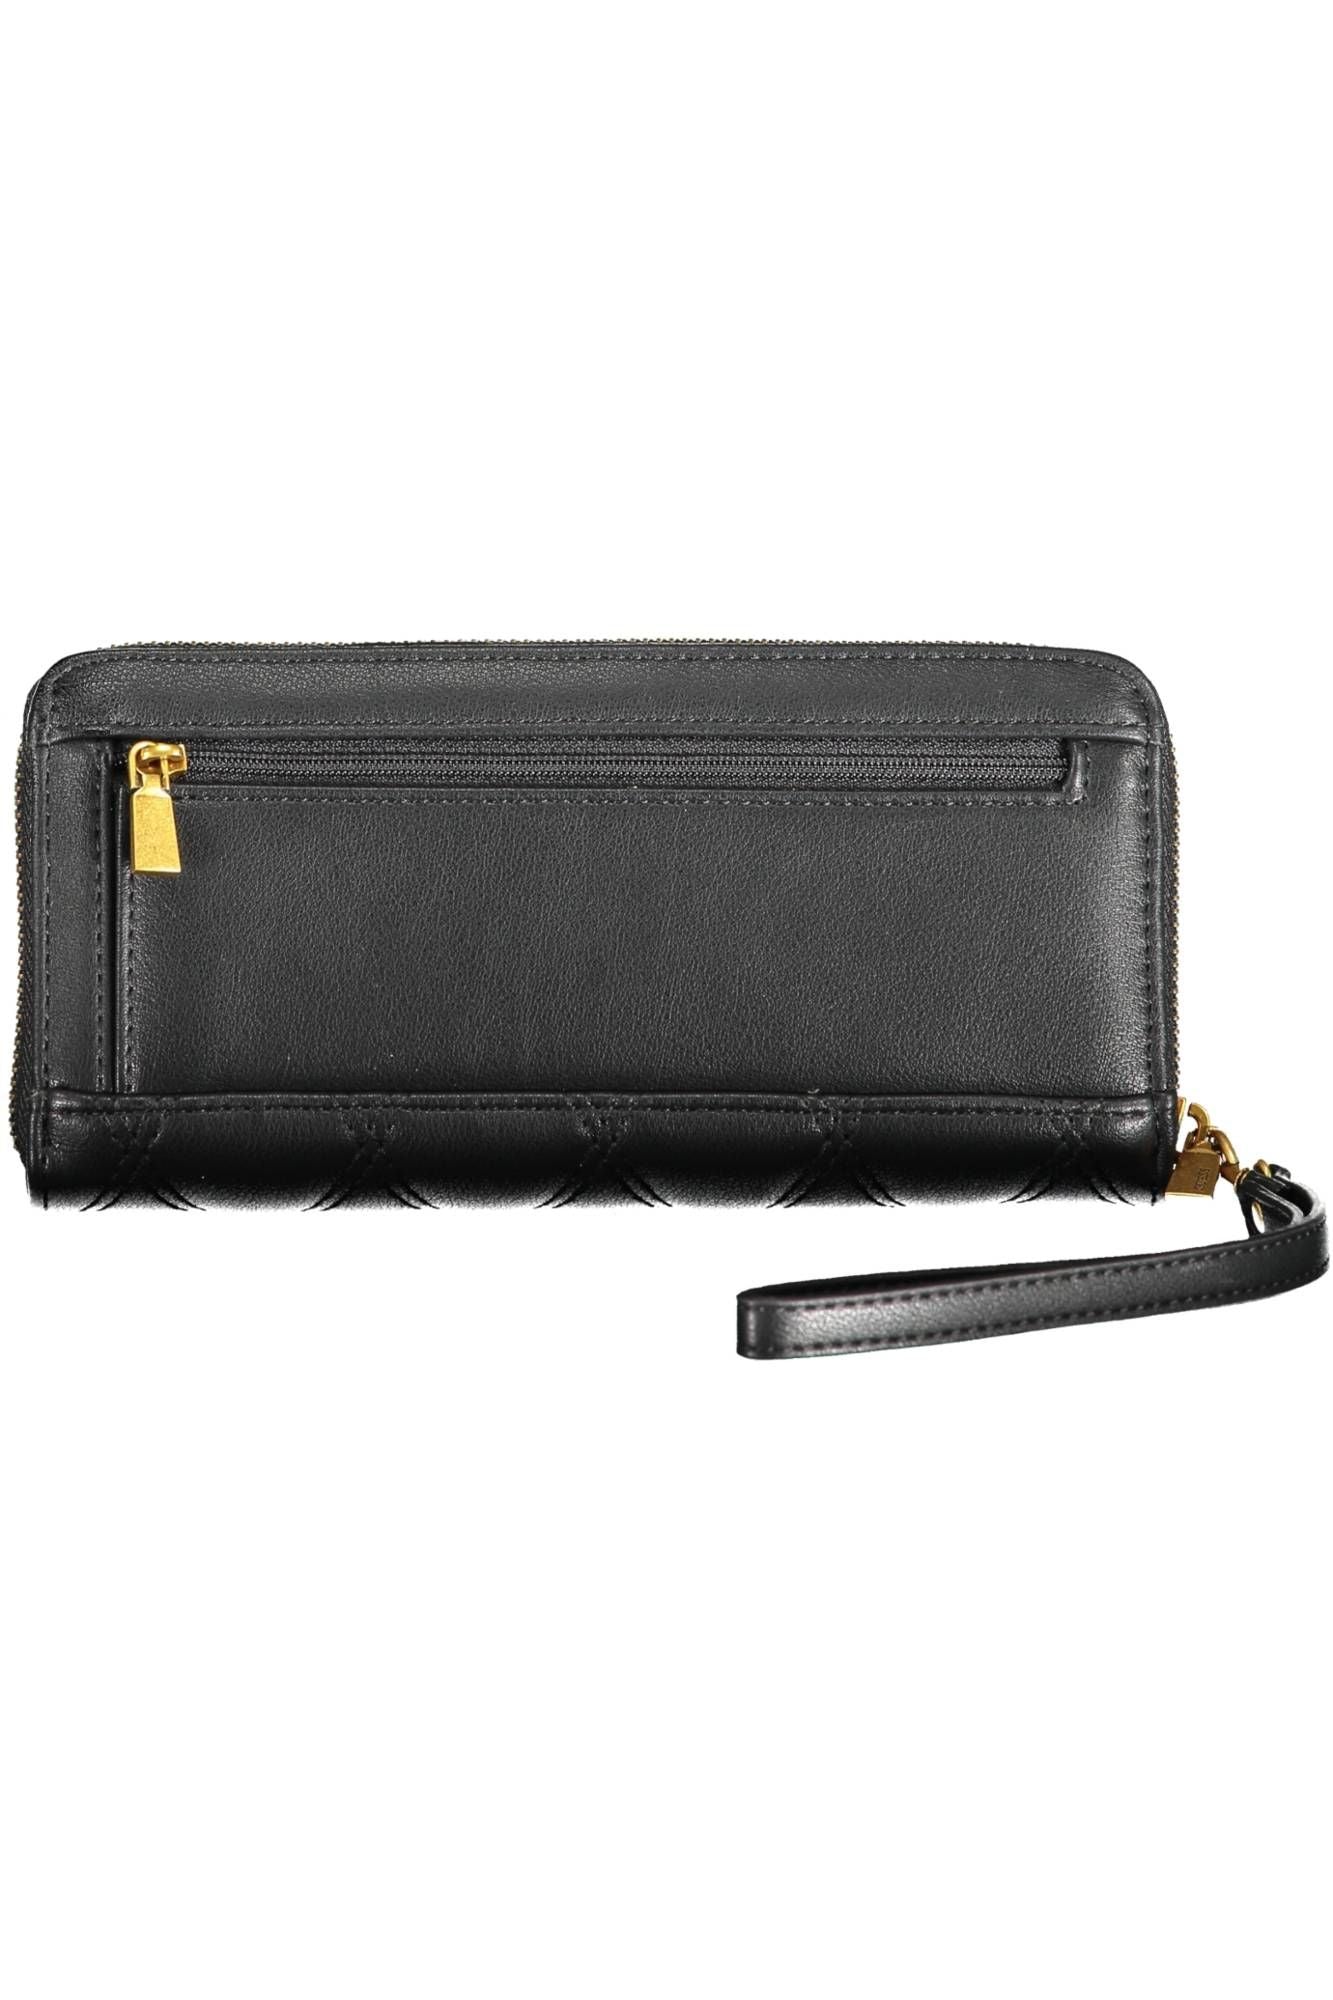 Guess Jeans Chic Contrasting Details Zip Wallet